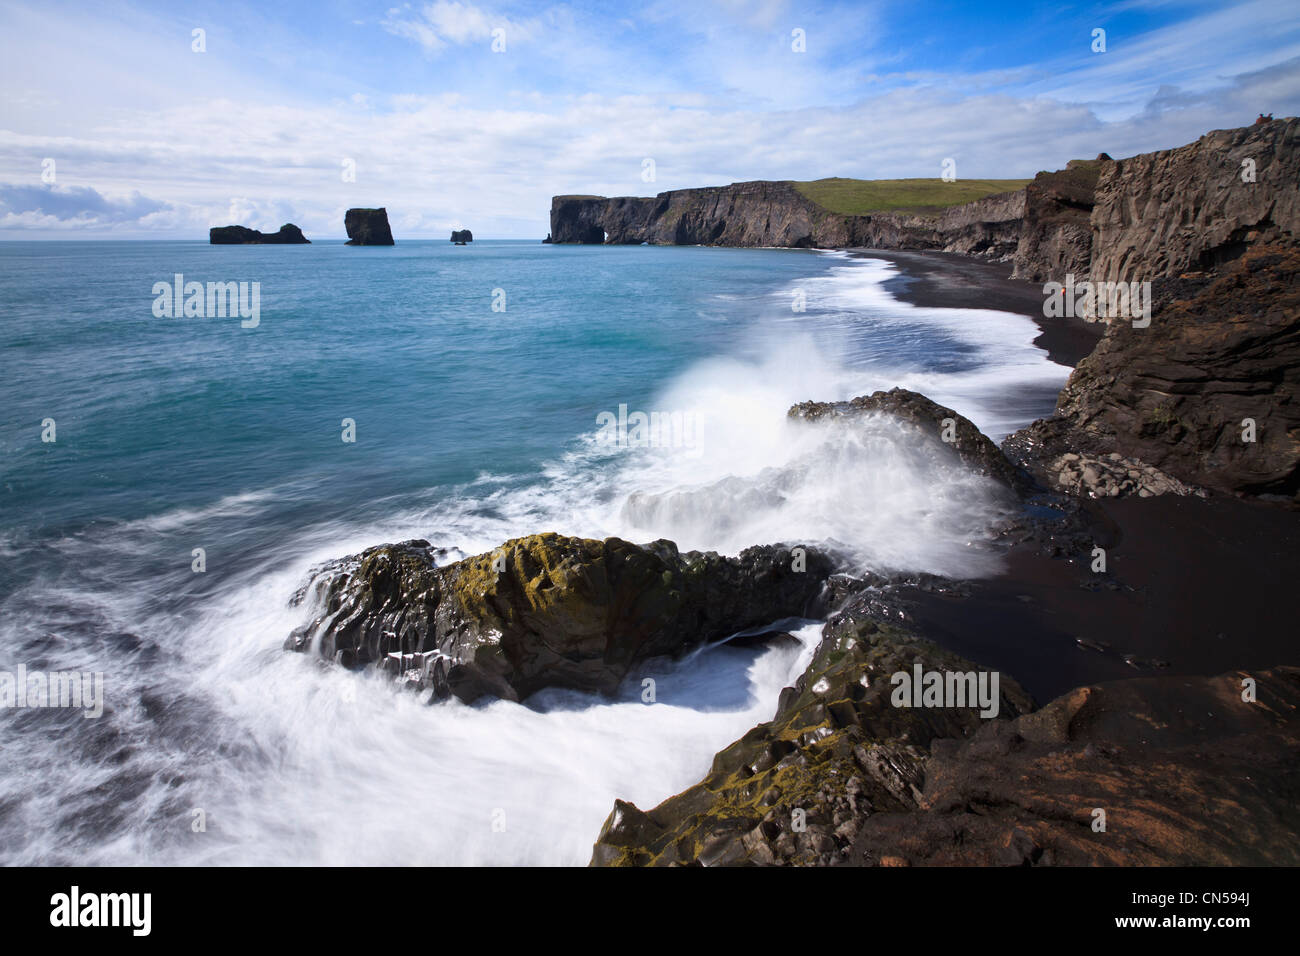 Iceland, Sudurland region, cliff and beach of Dyrholaey near Vik, the point most to the South ofIceland Stock Photo